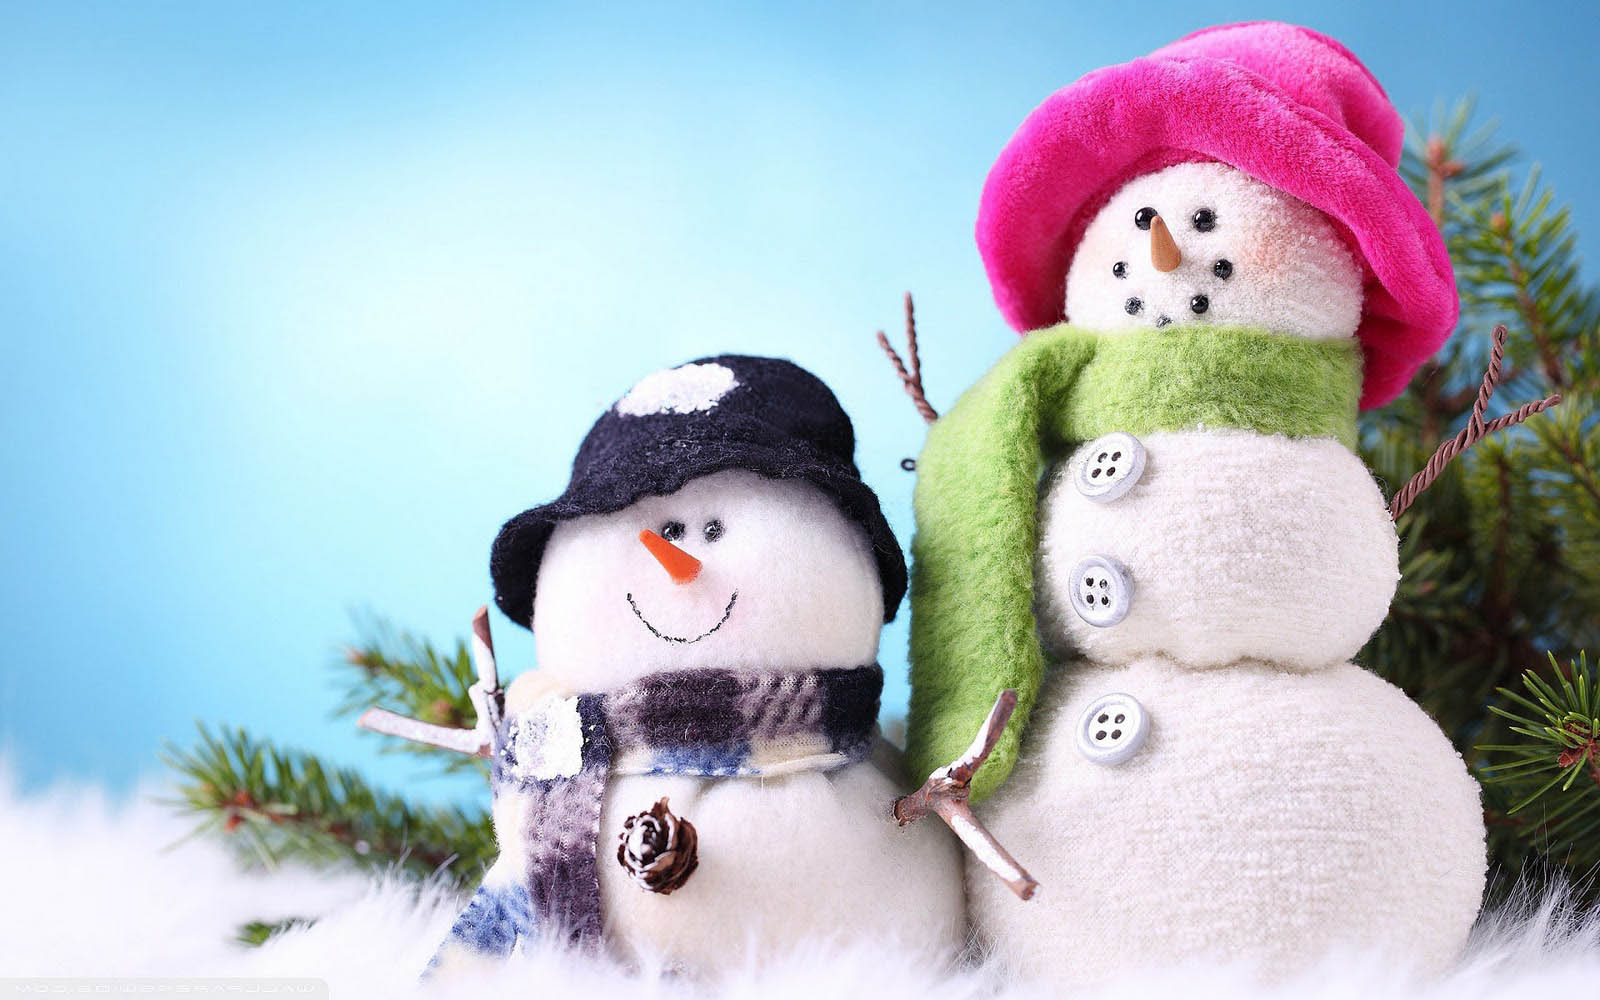 Tag Snowman Wallpaper Background Photos Pictures And Image For